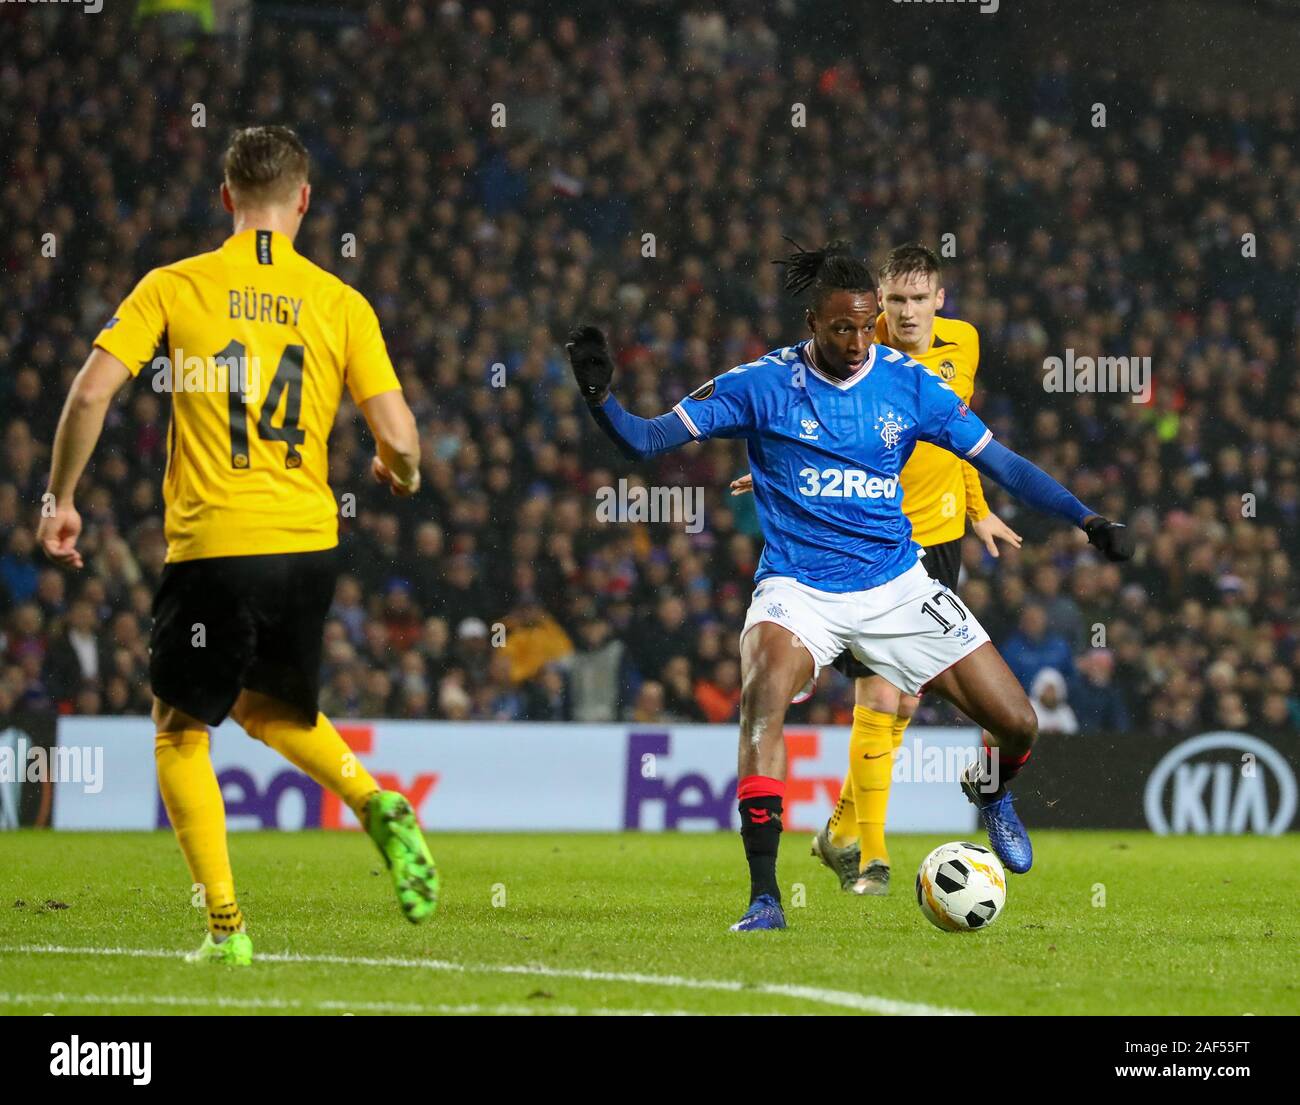 Glasgow, UK. 12 December 2019. Glasgow Rangers played the sixth and final Group G fixture in the UEFA Europa League at Ibrox, their home stadium against the Swiss team BSC Young Boys. The final score was a 1 -1 draw with the  Rangers goal scored by Alfredo Morelos and that was enough for  Rangers to progress to the next round Credit: Findlay / Alamy News Stock Photo